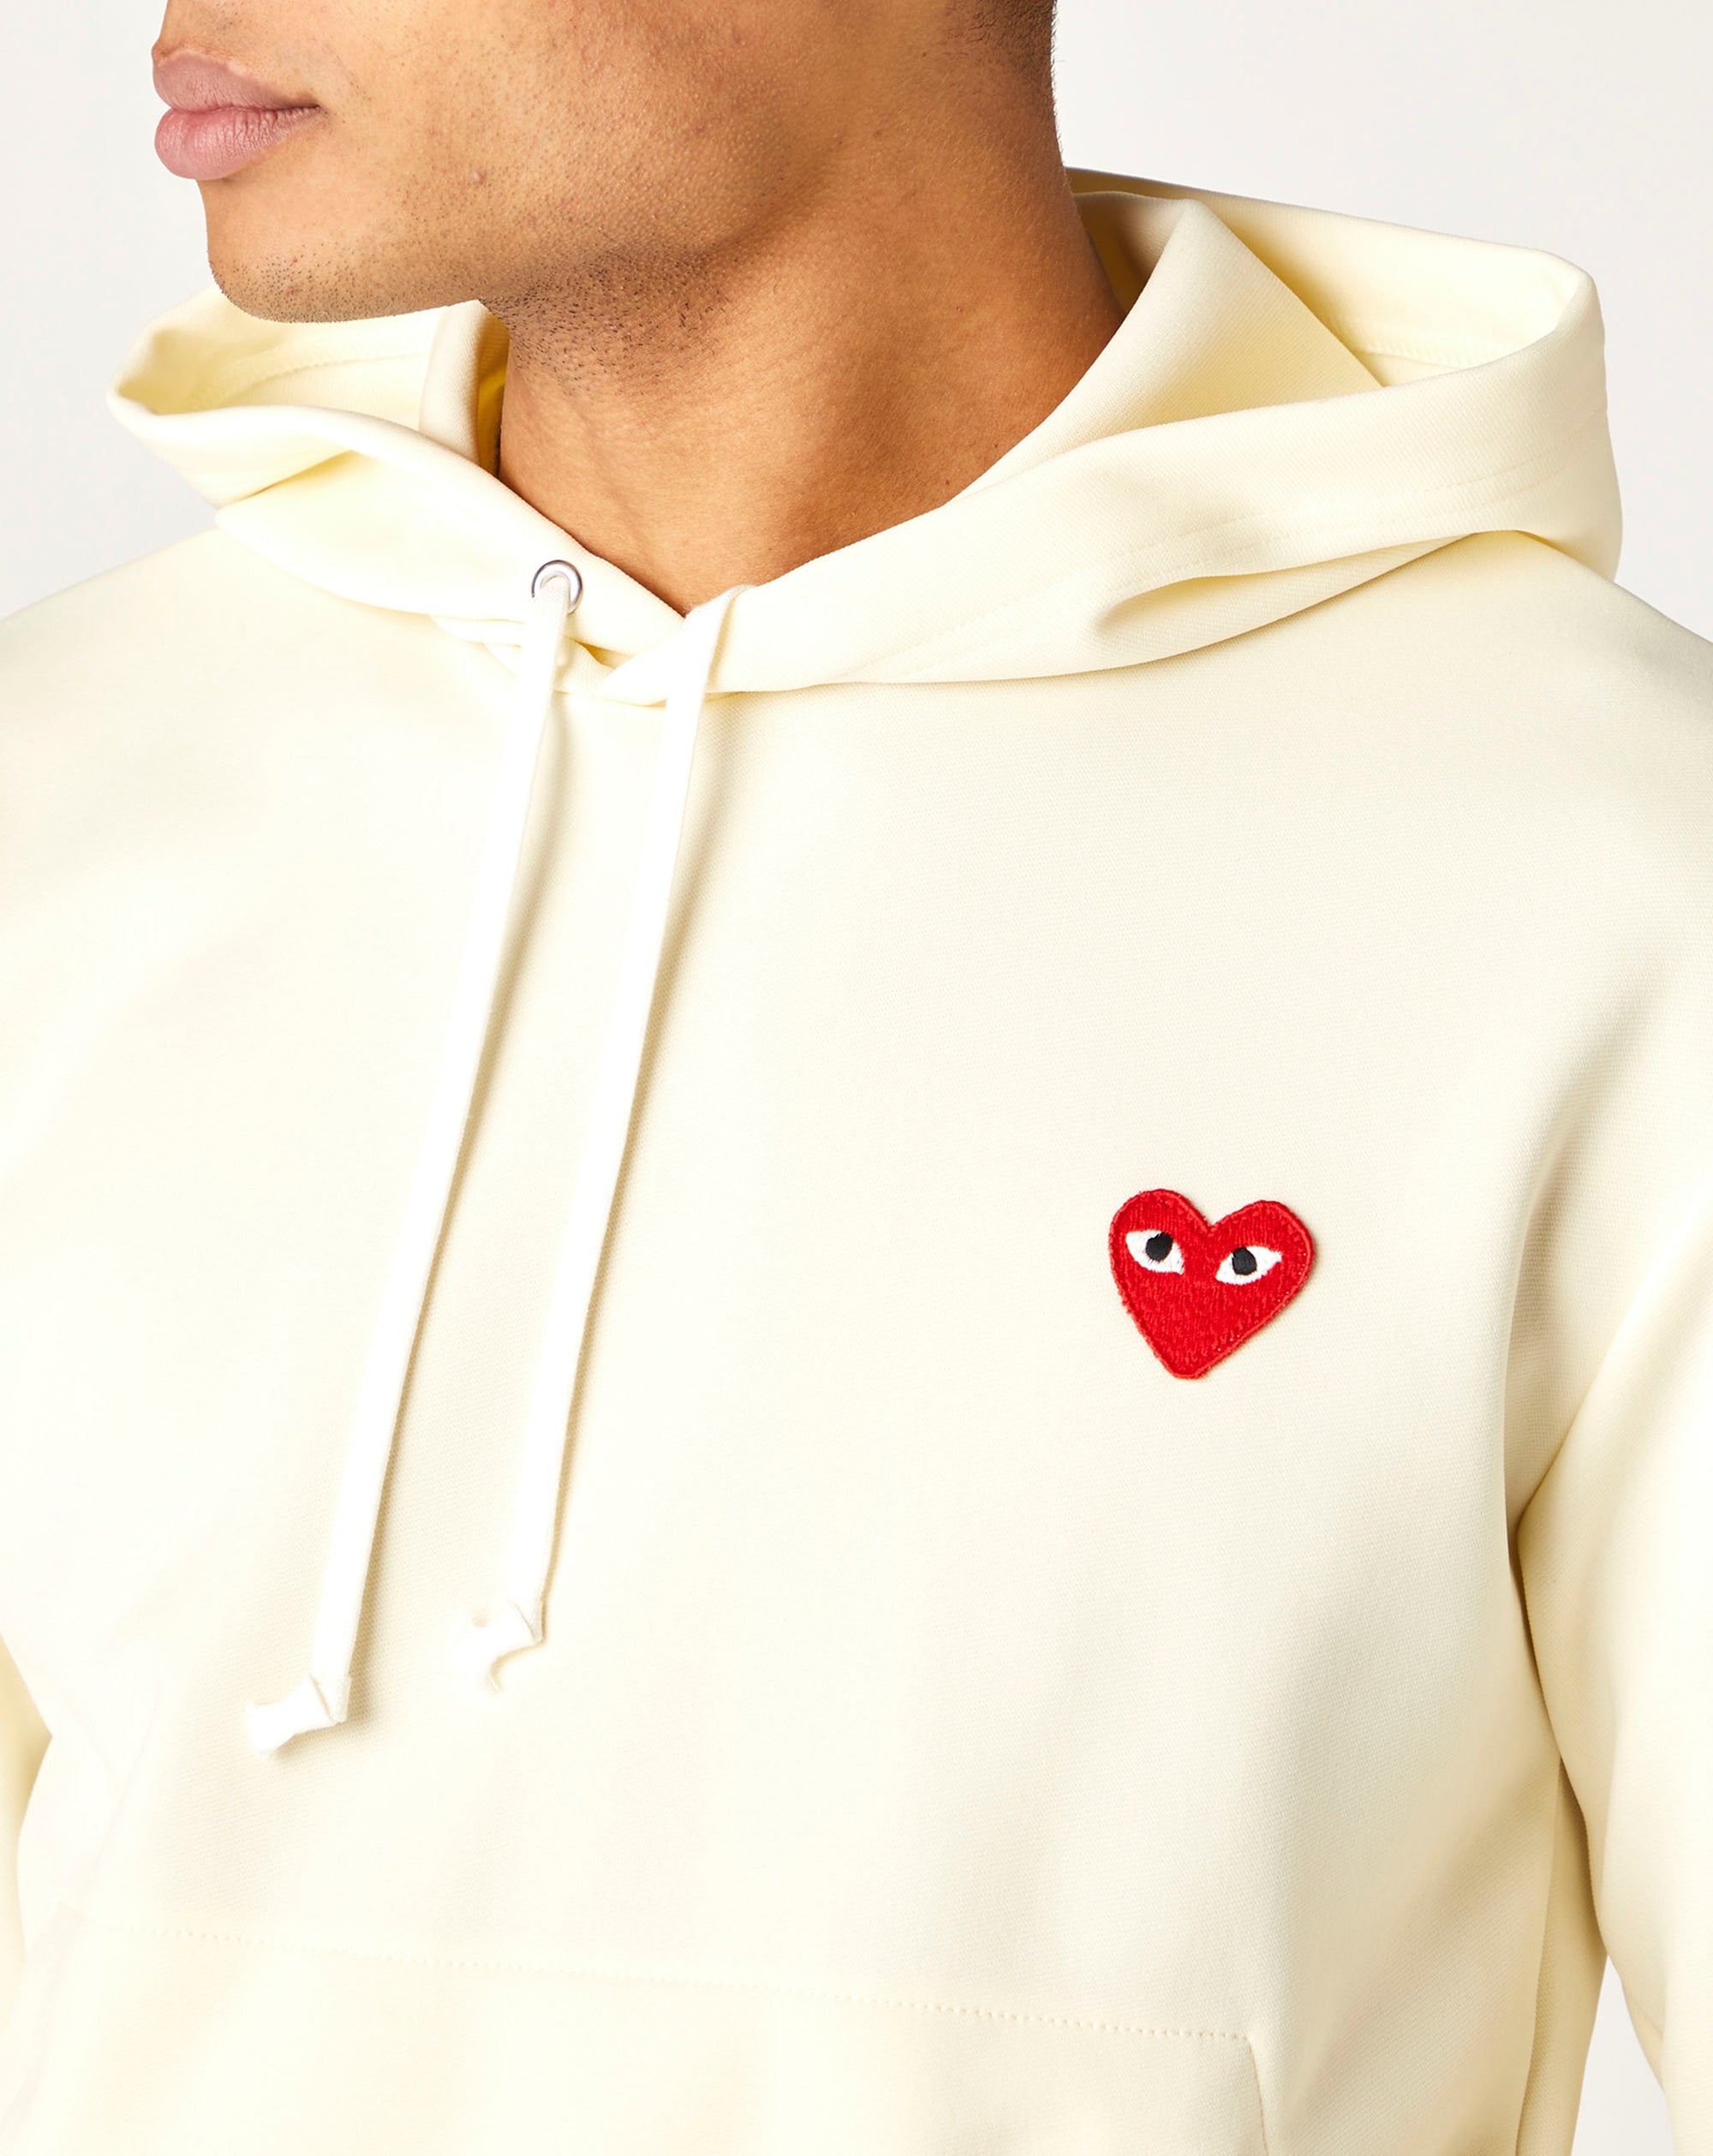 Comme des Garcons PLAY Pullover Hoodie - Rule of Next Apparel